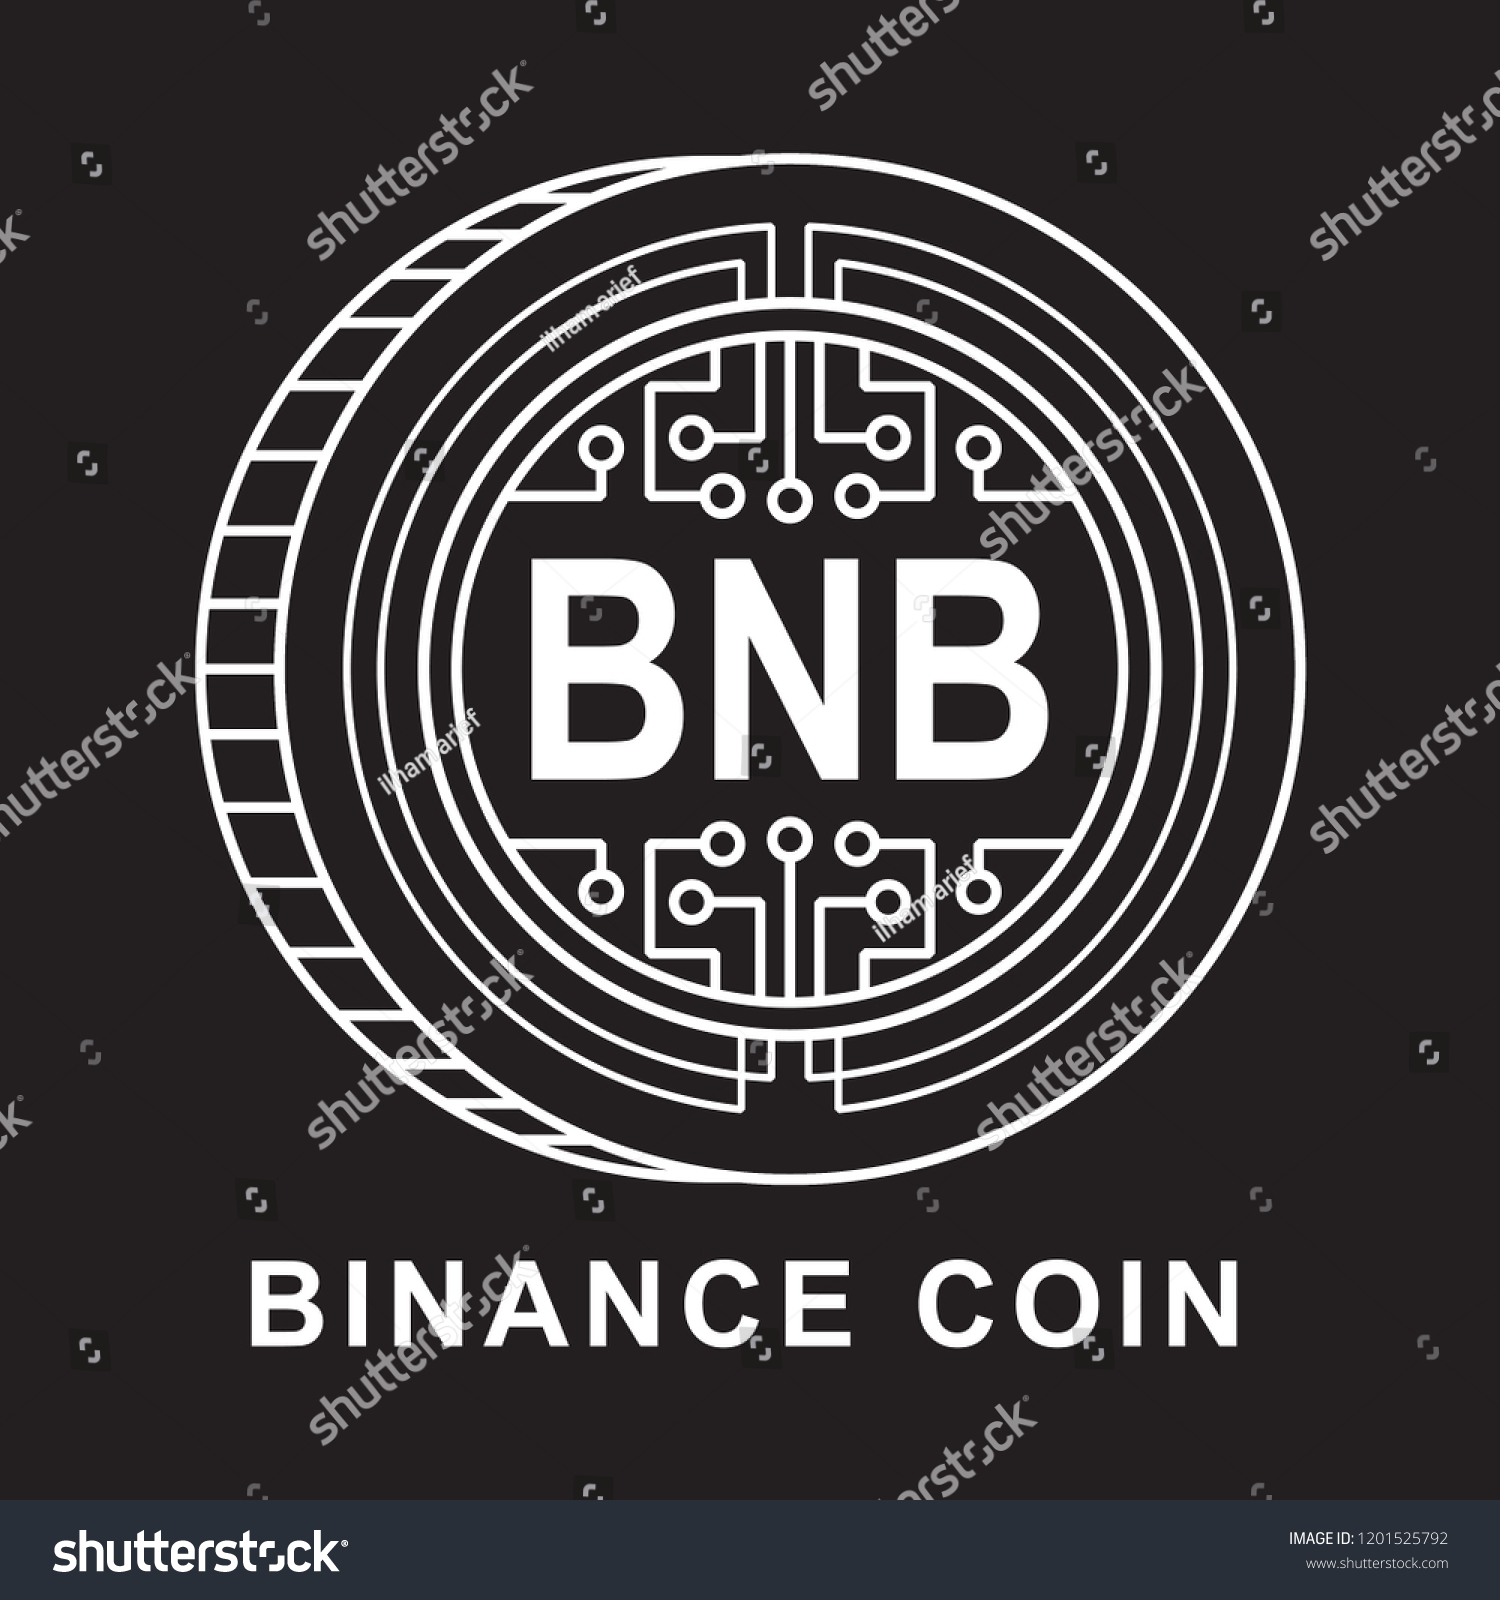 SVG of binance coin Cryptocurrency  icon with black background svg